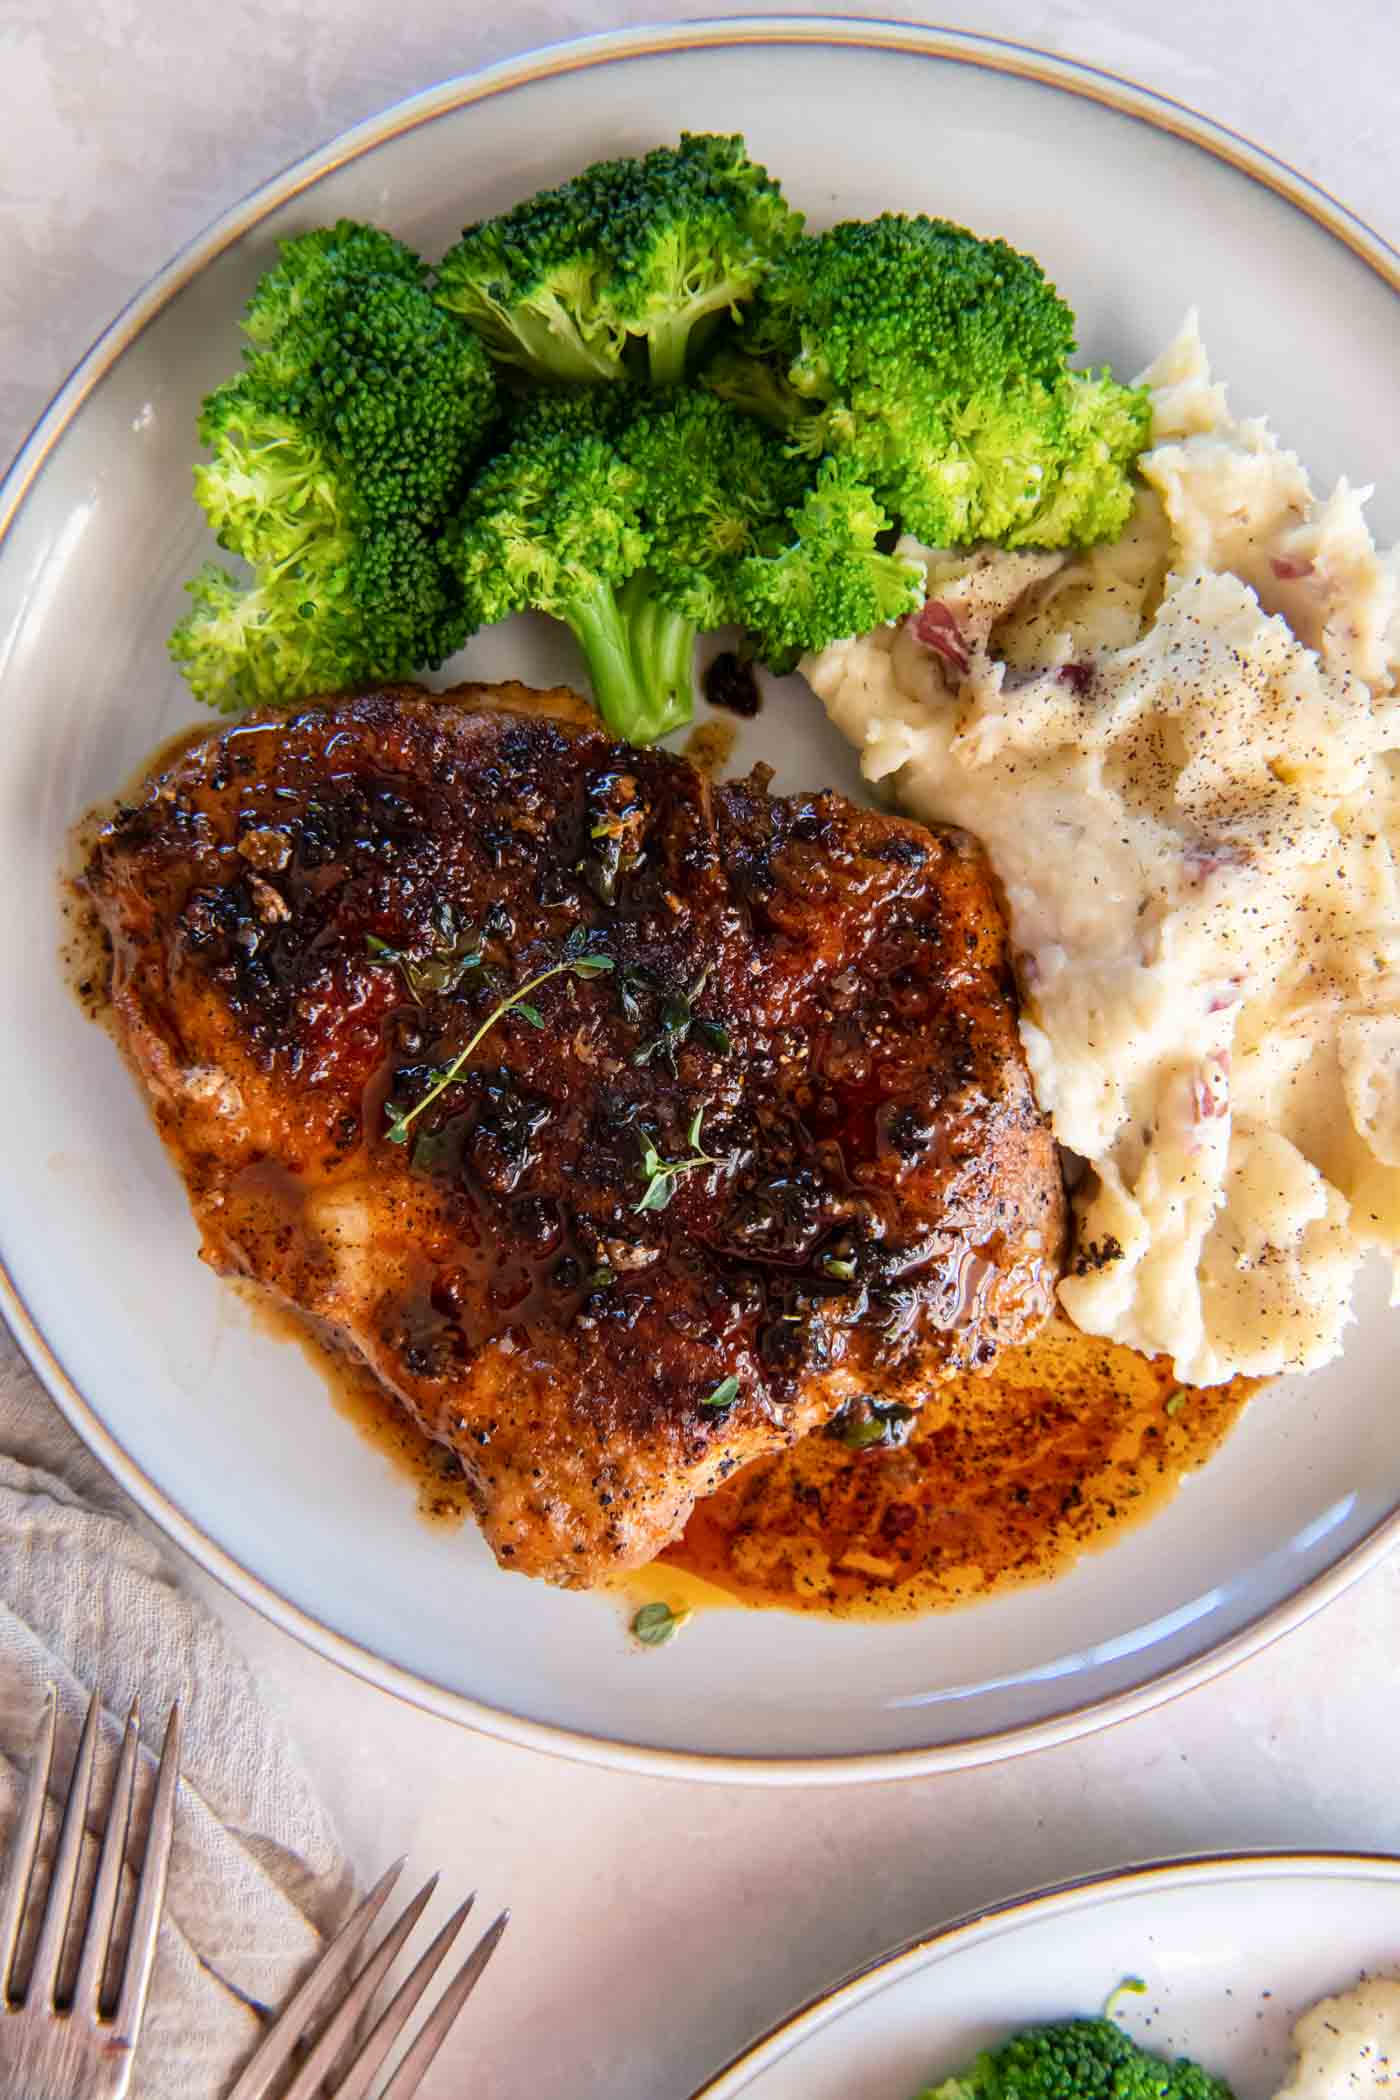 Pan fried pork chop served with mashed potatoes and broccoli.